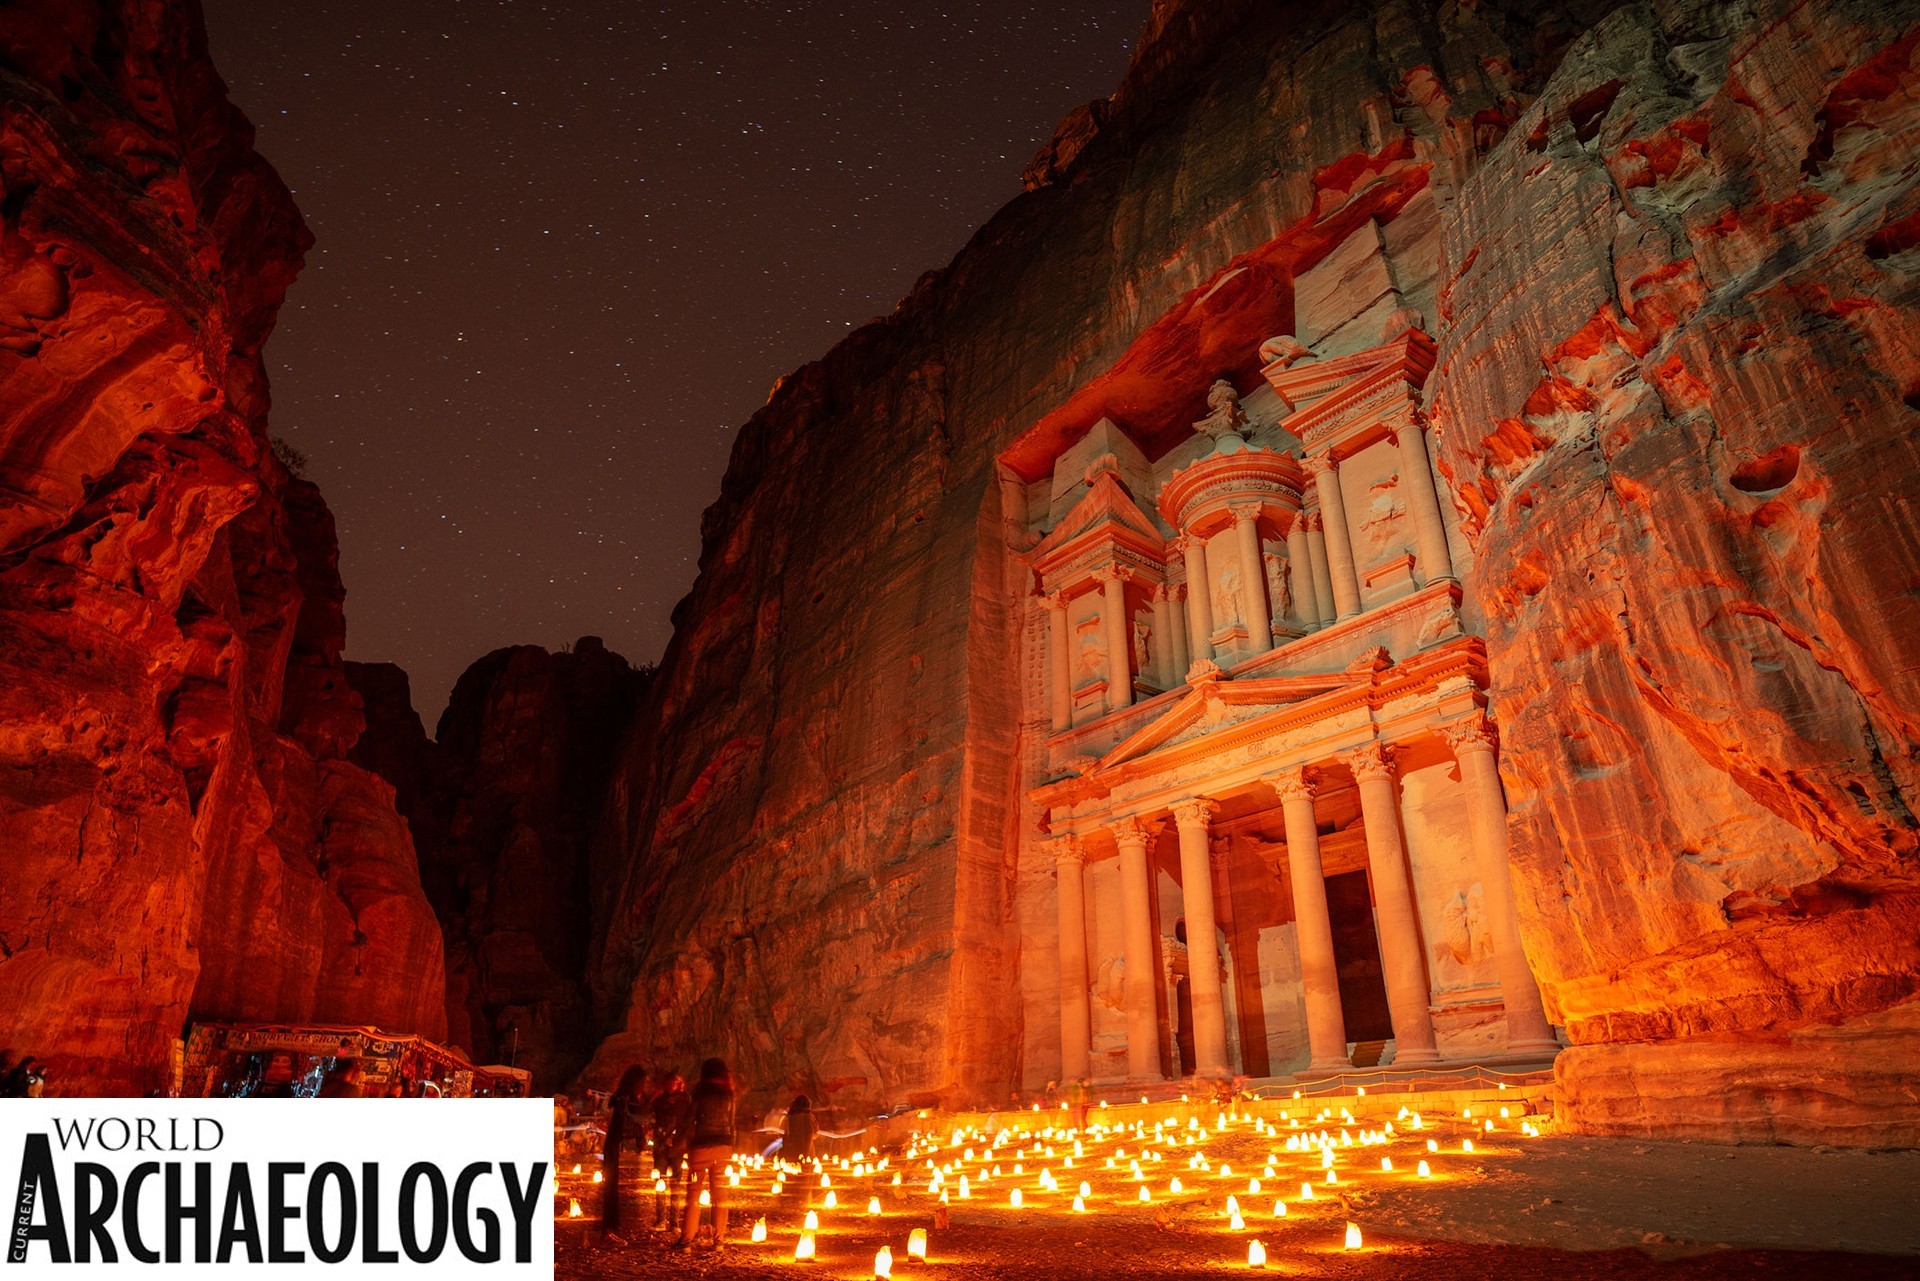 Current World Archeology Awards 2019 Petra by CandleLight Enrico Pescantini